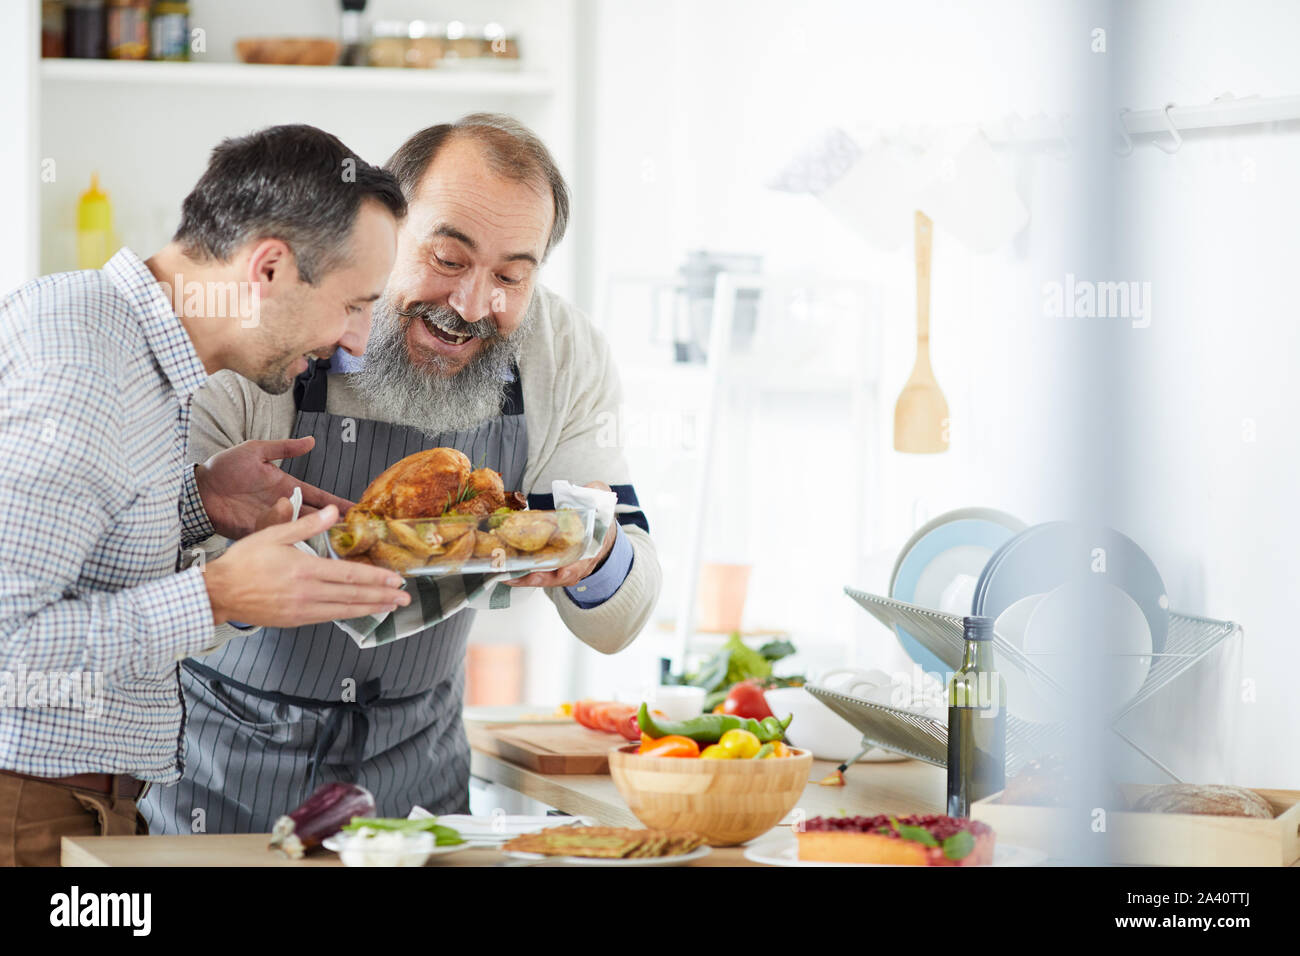 Senior man with beard and young man holding dish of roast turkey prepared for dinner at home Stock Photo